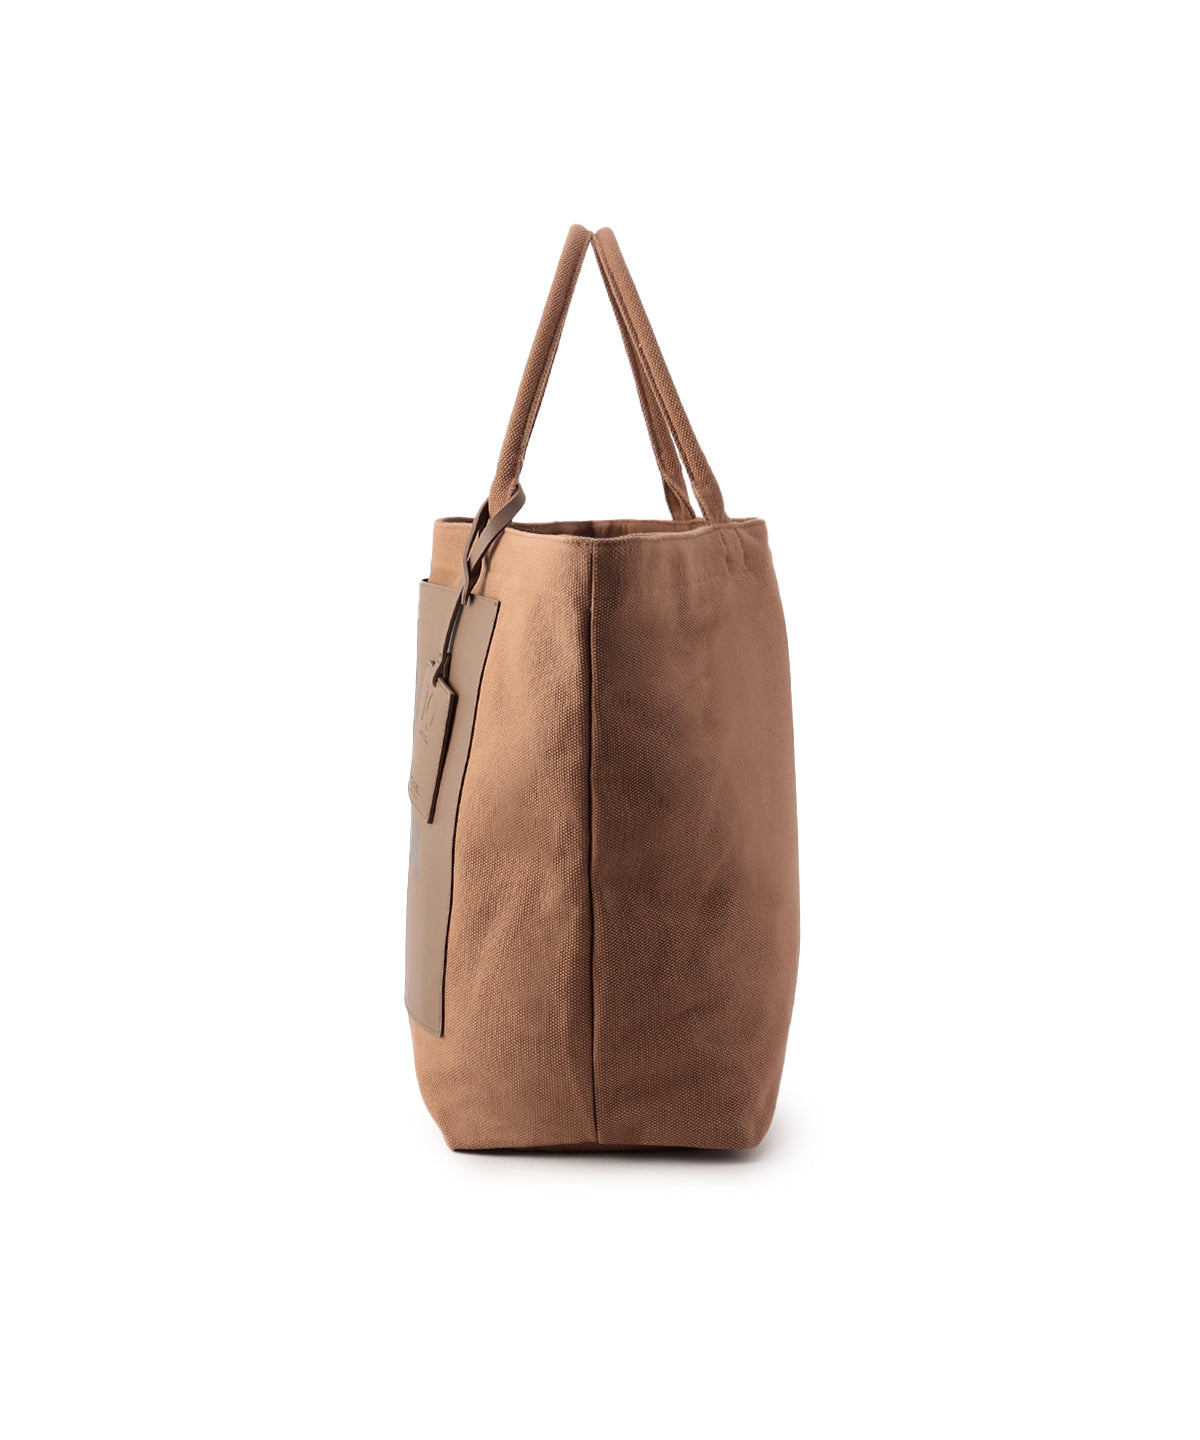 Colored Canvas Tote (Large)BROWN